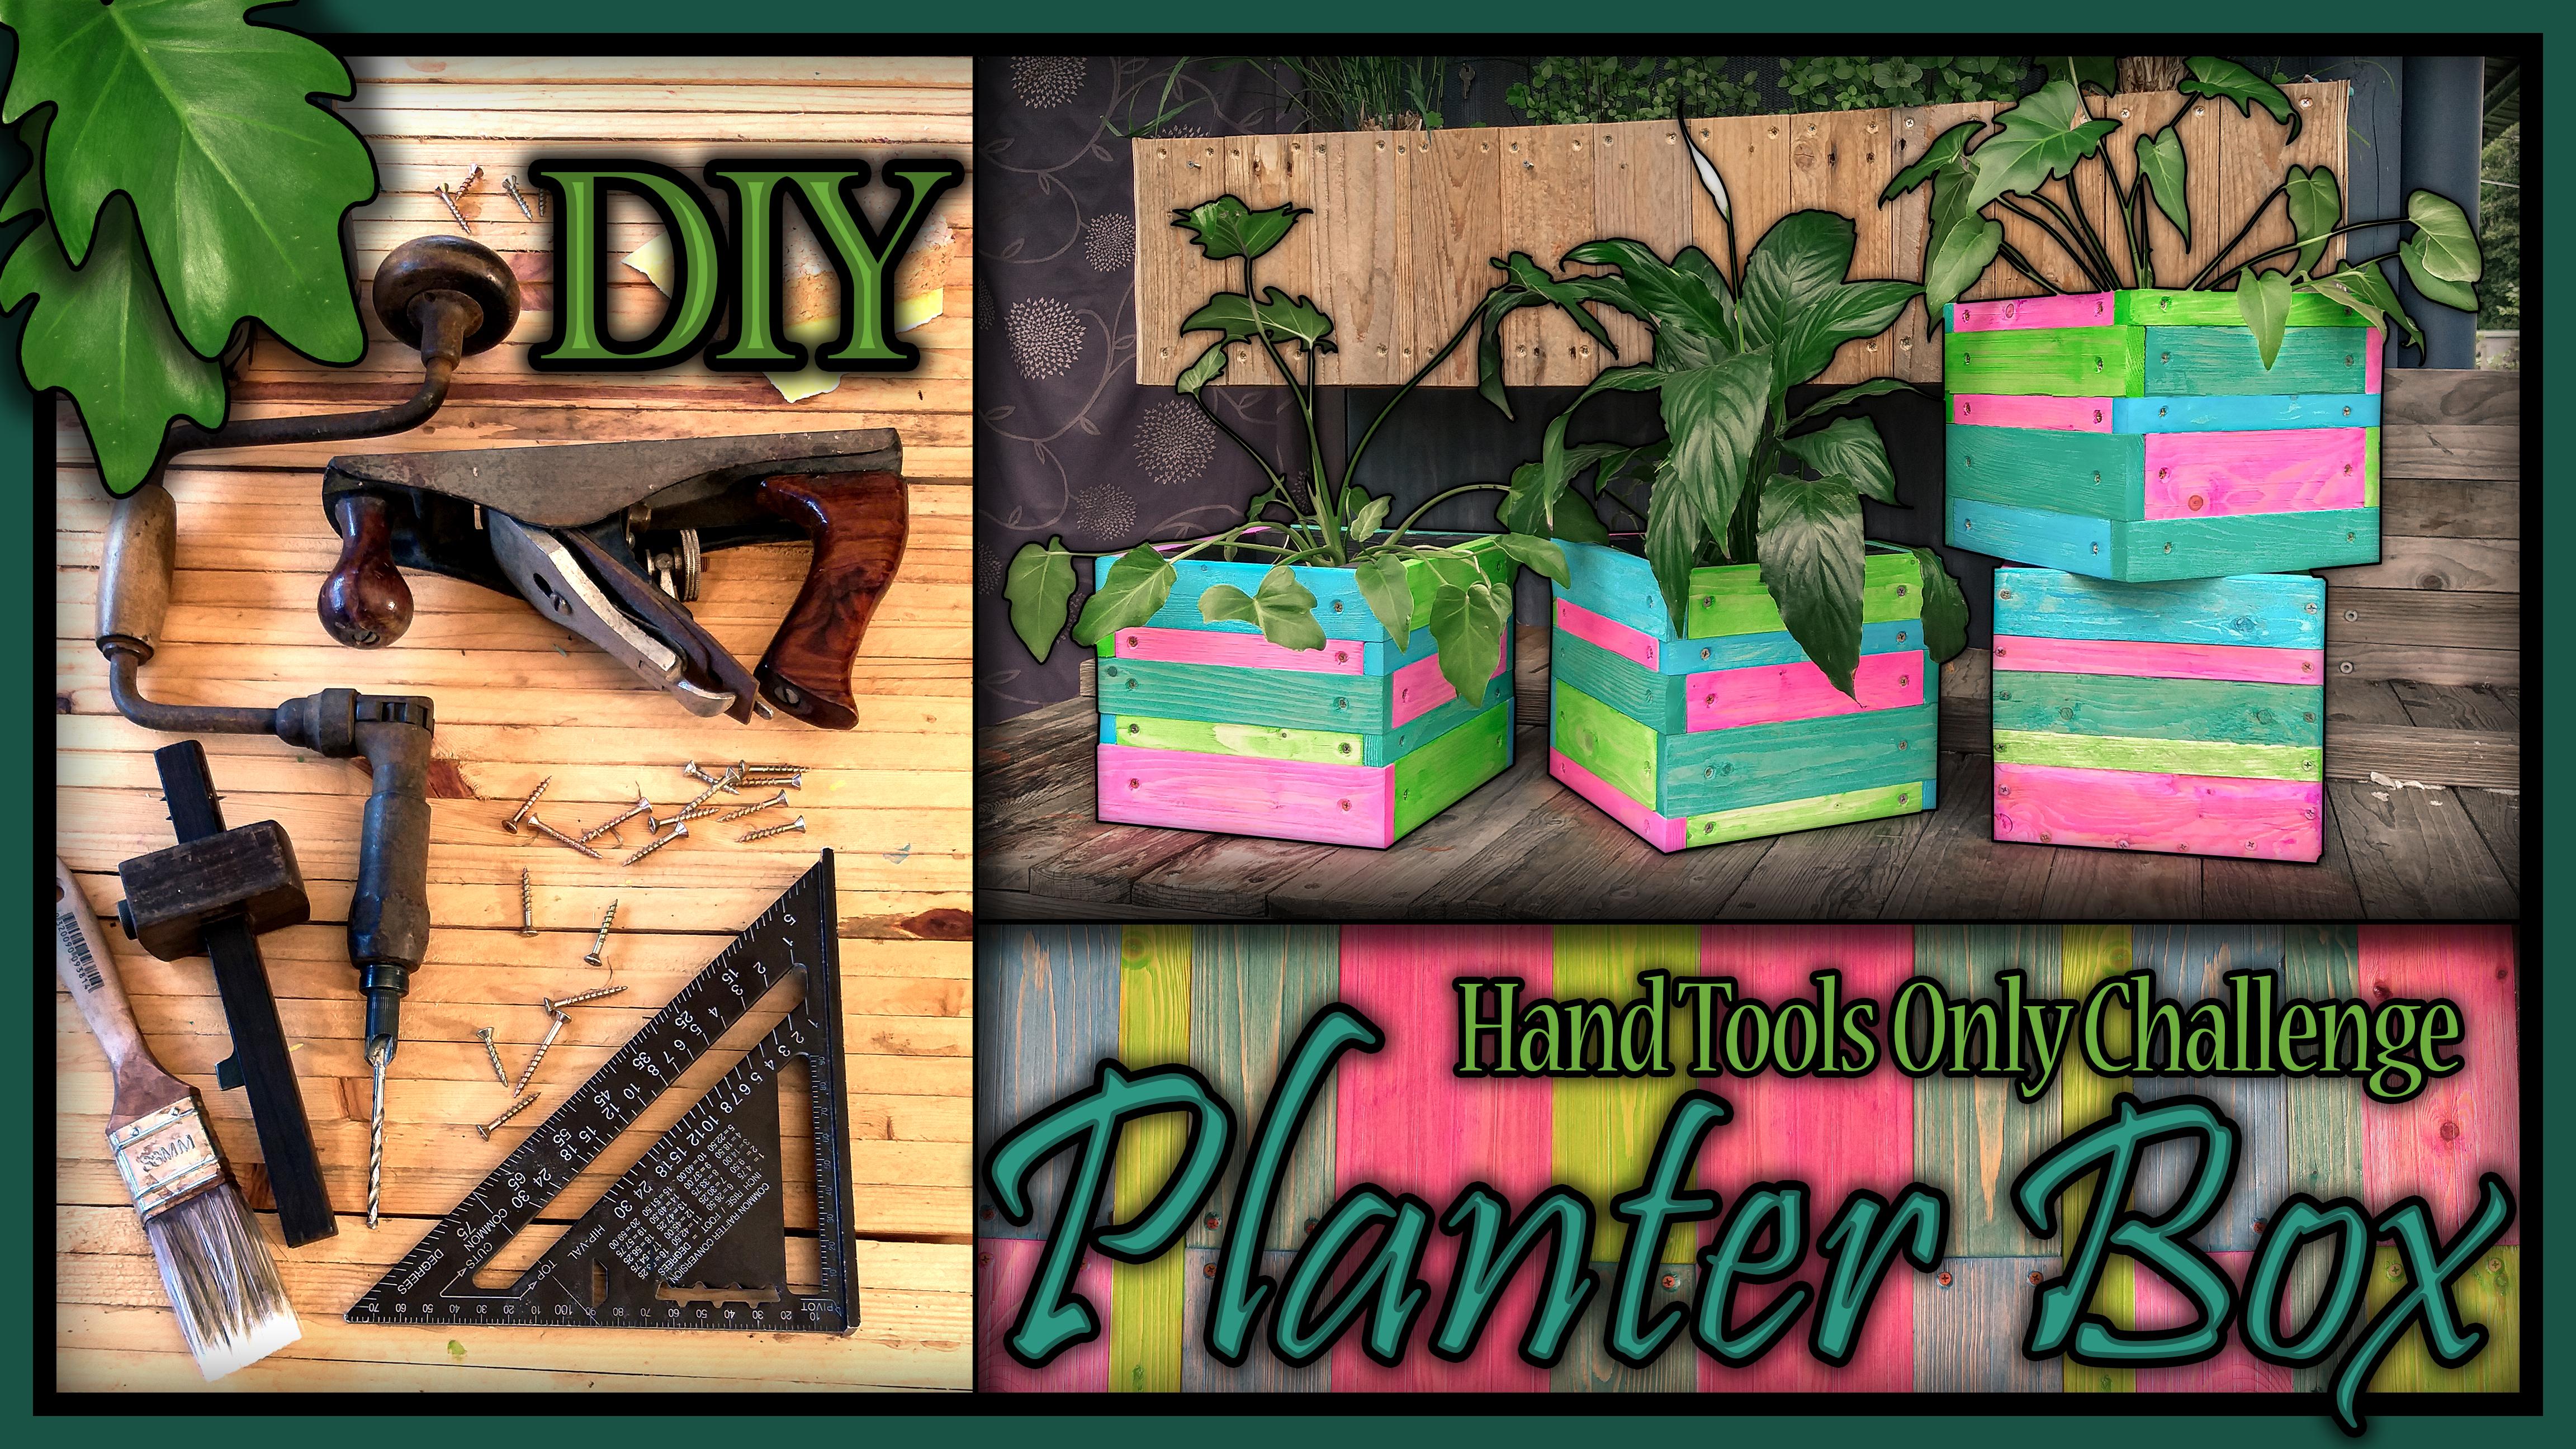 Planter Boxs Hand Tools Only.jpg